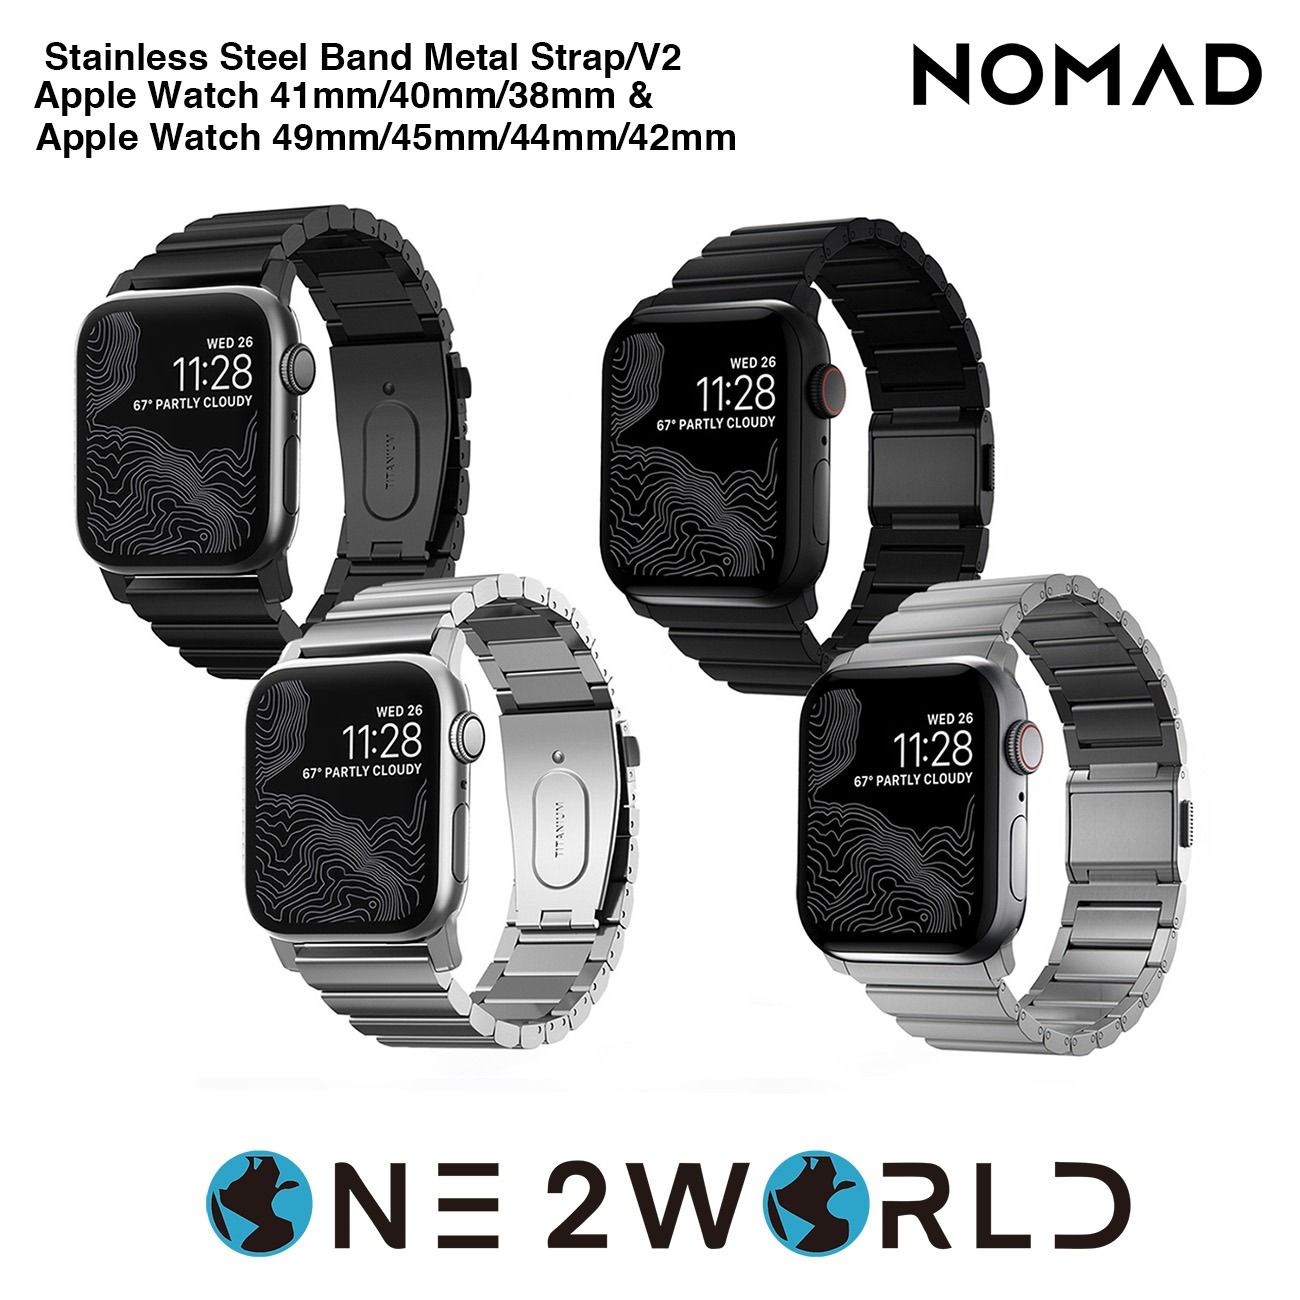 NOMAD Titanium Band Metal 41mm/40mm/38mm | & Watches for Smart & 49mm/45mm/44mm/42mm, Carousell Gadgets, Apple Watch Strap on | Phones V2 Mobile Wearables